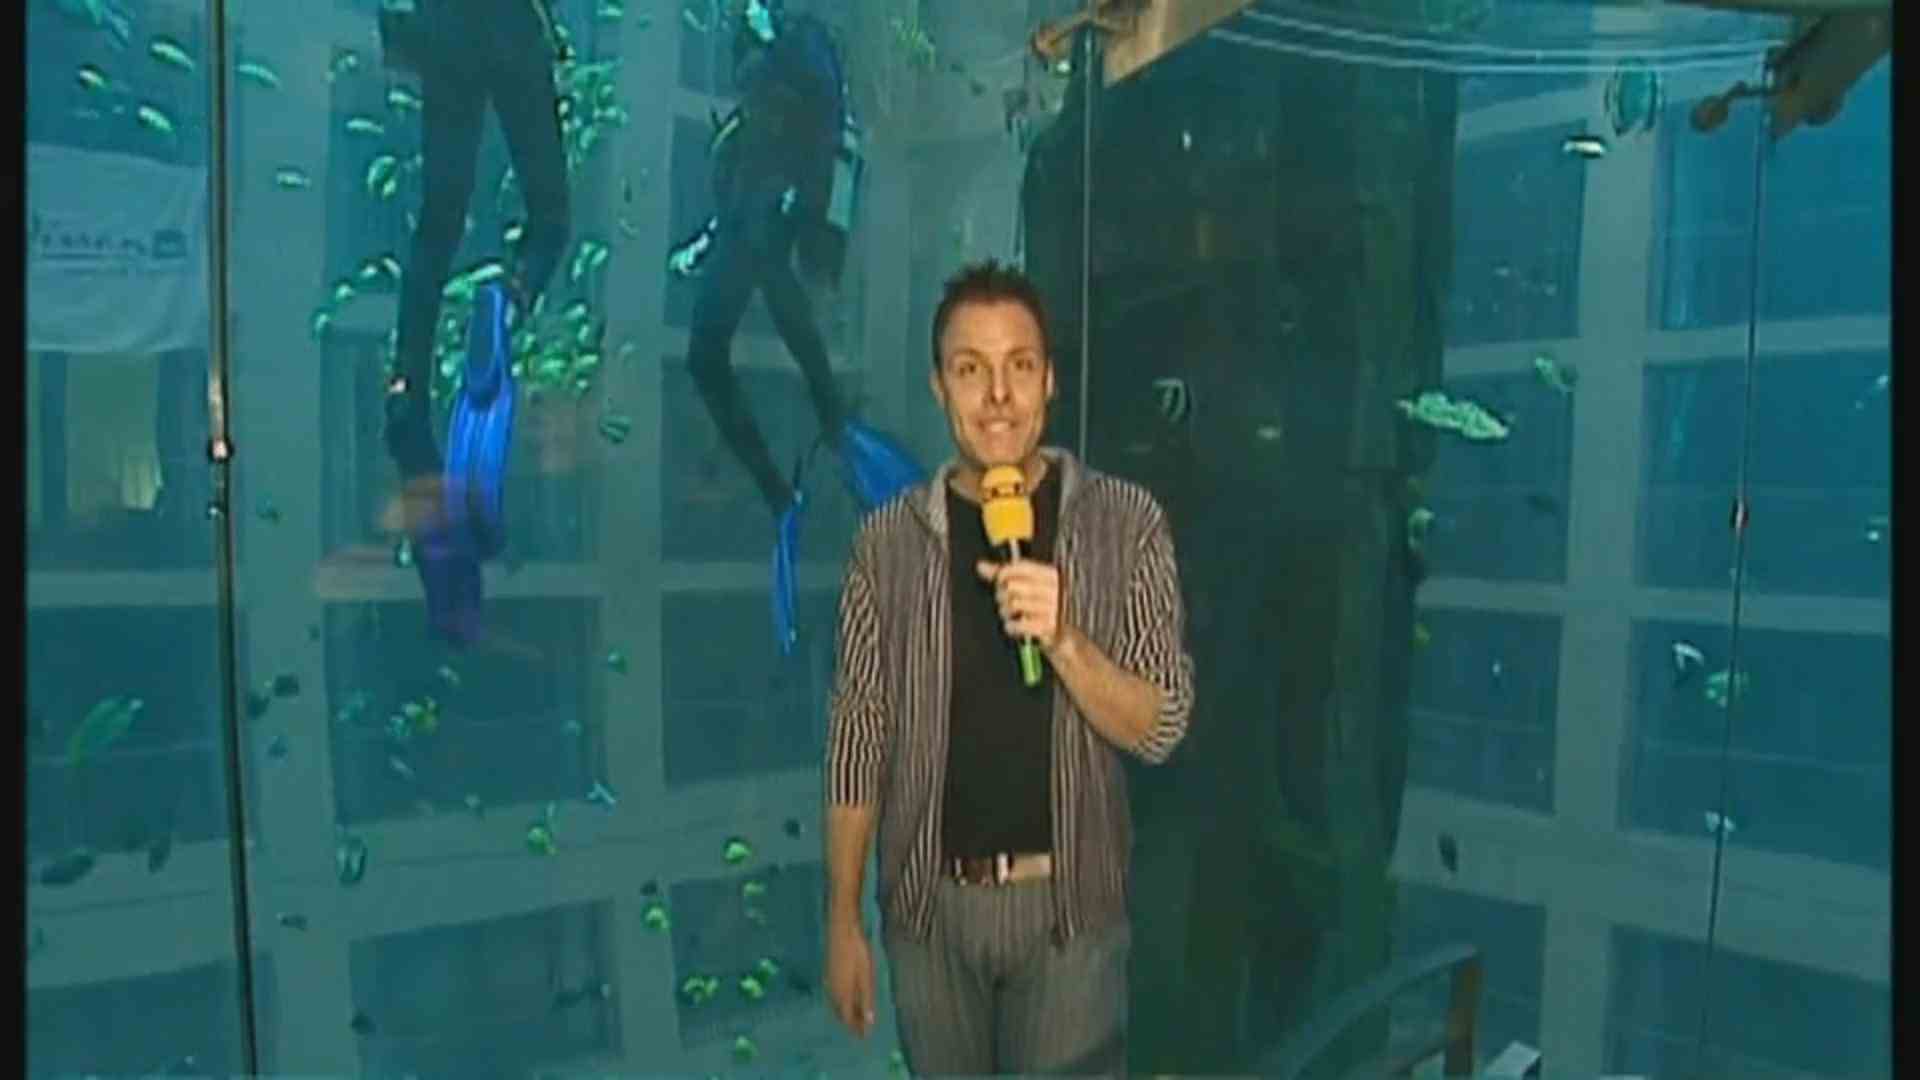 RTL reporter explains the giant aquarium archive video from February 2004